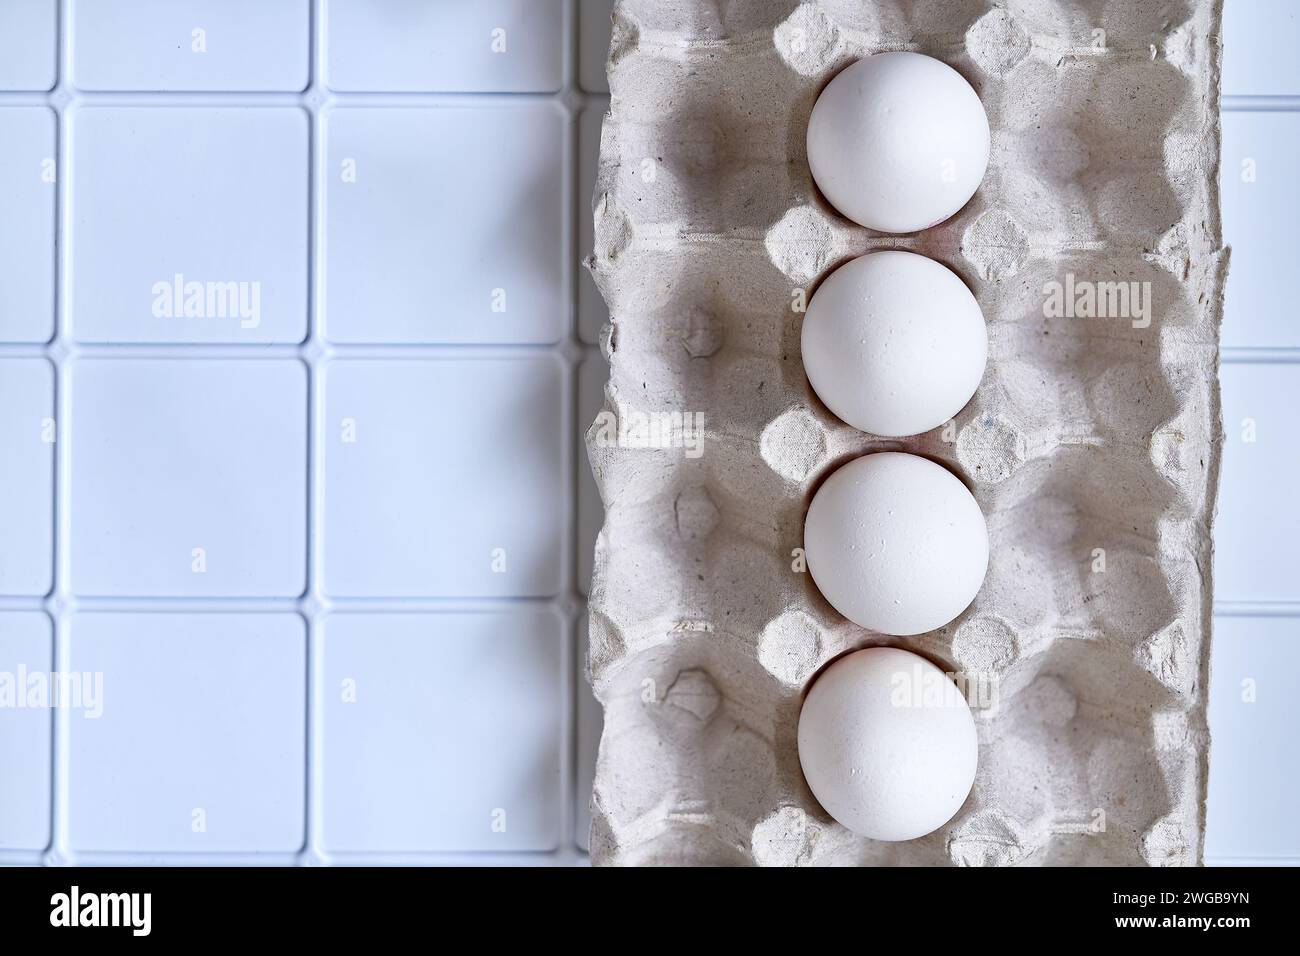 Four white eggs in a packing carton on a plastic surface Stock Photo